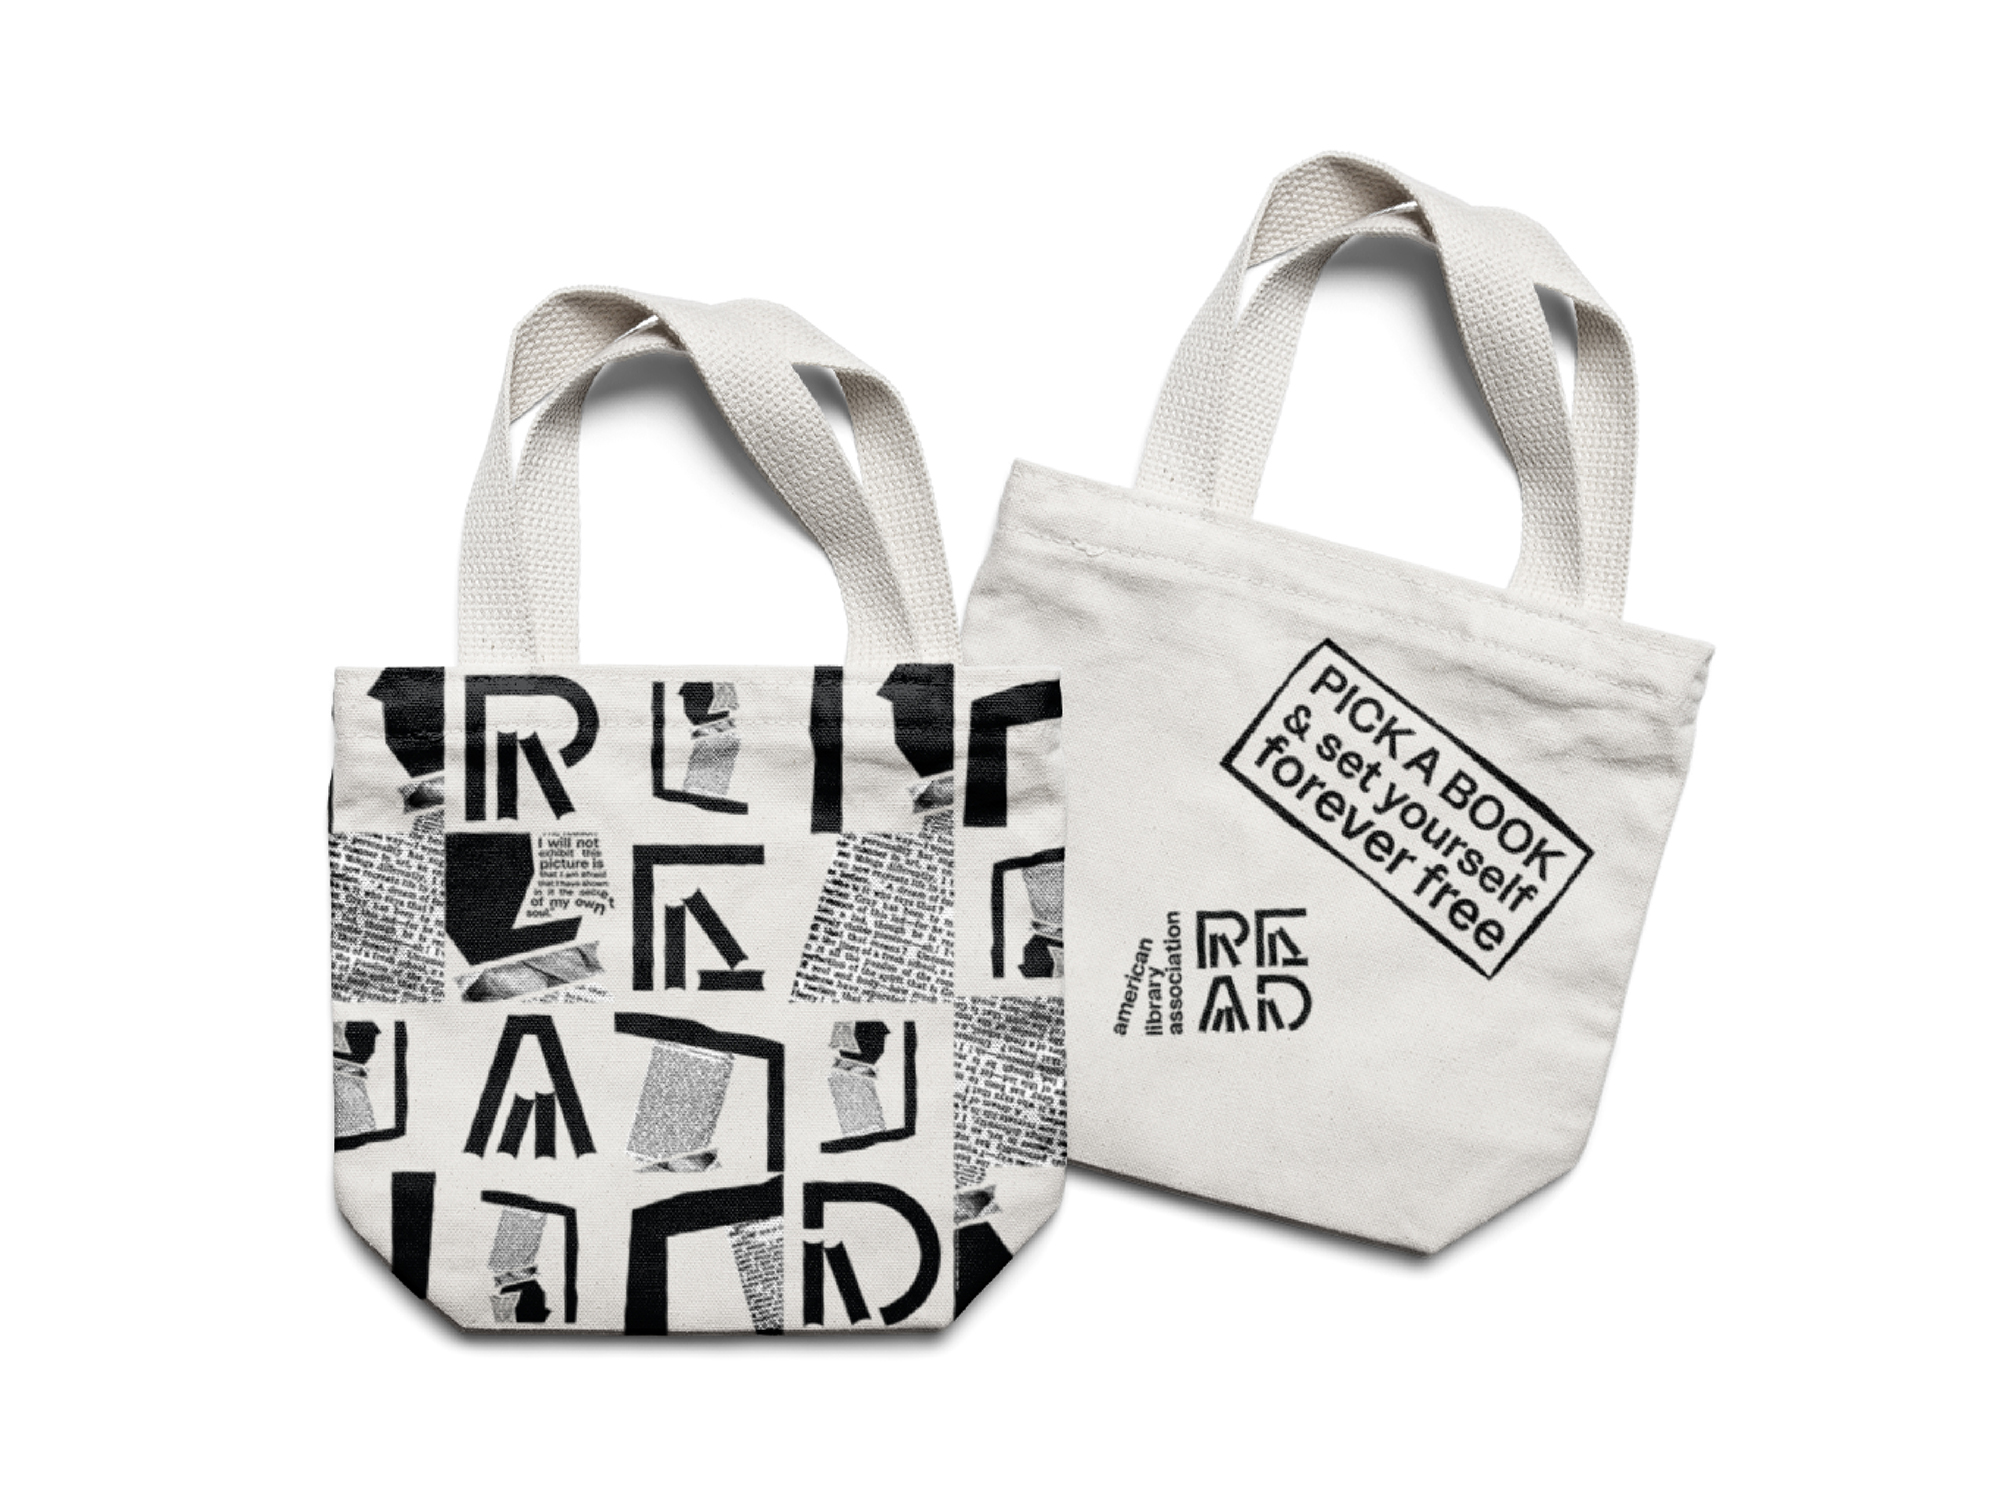 Typography-based design on tote bags.